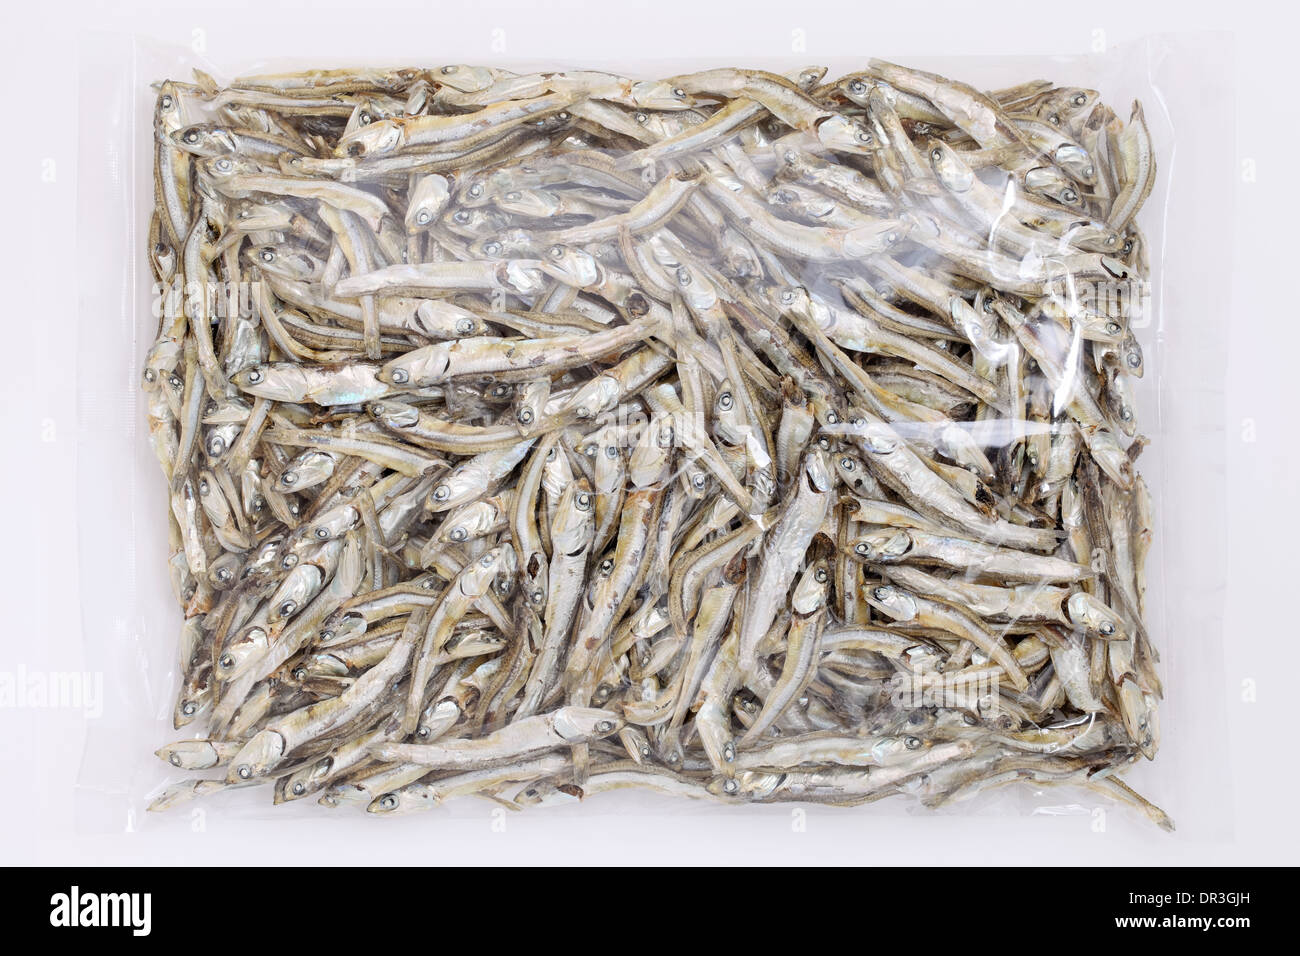 Dried small fish used in asian cuisine Stock Photo